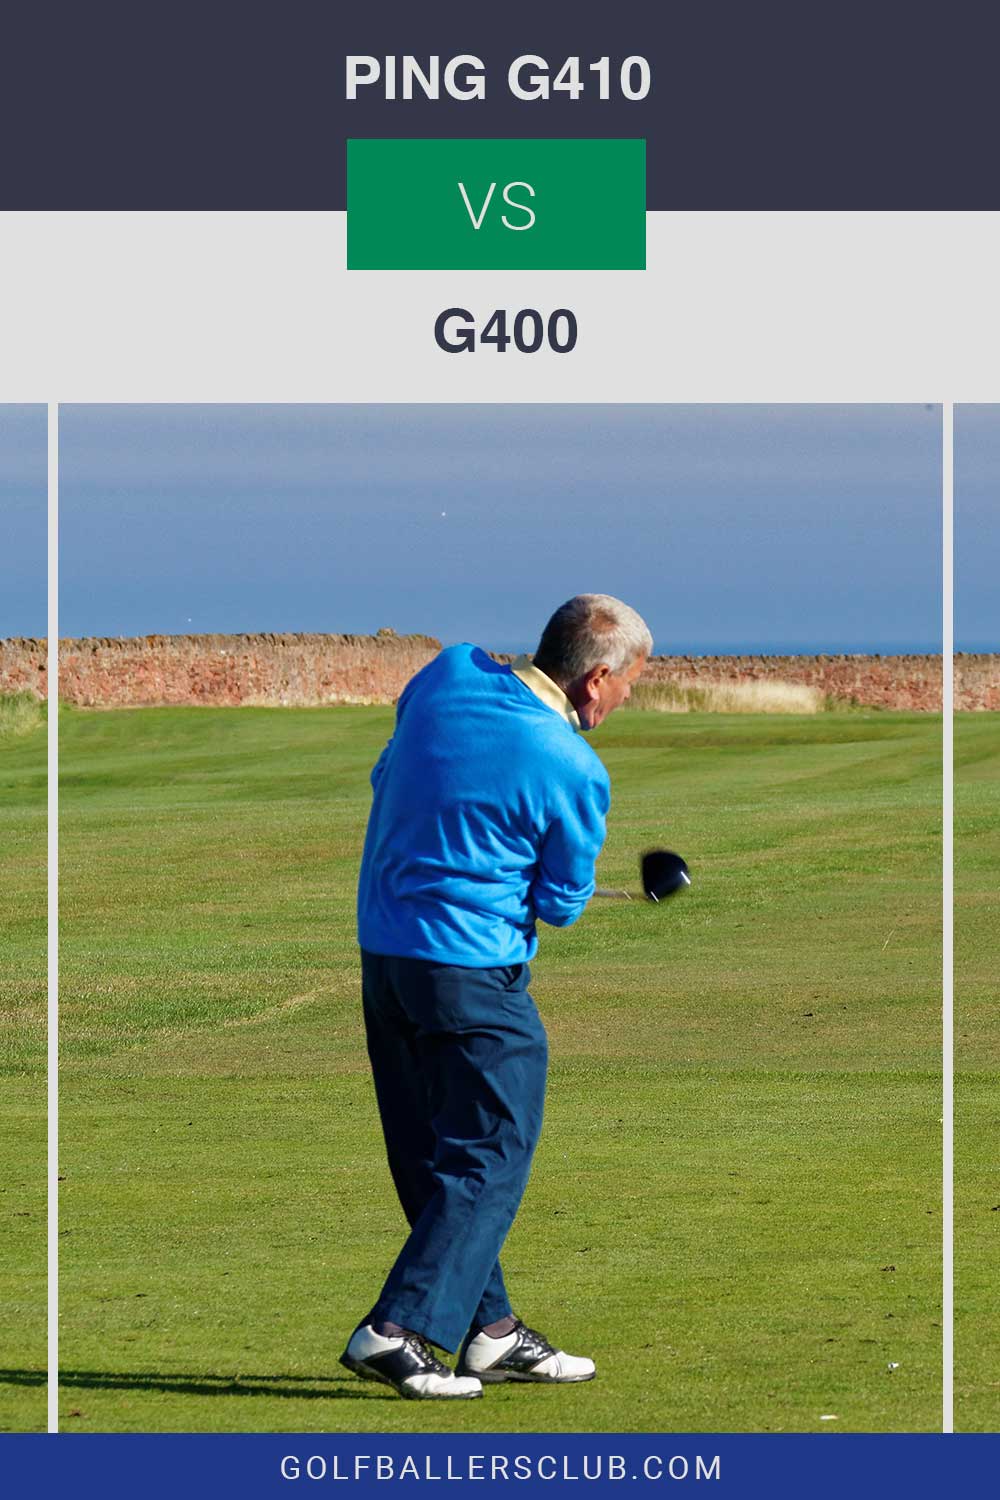 Old man in blue shirt took a shot on a golf course - PING g410 vs g400.